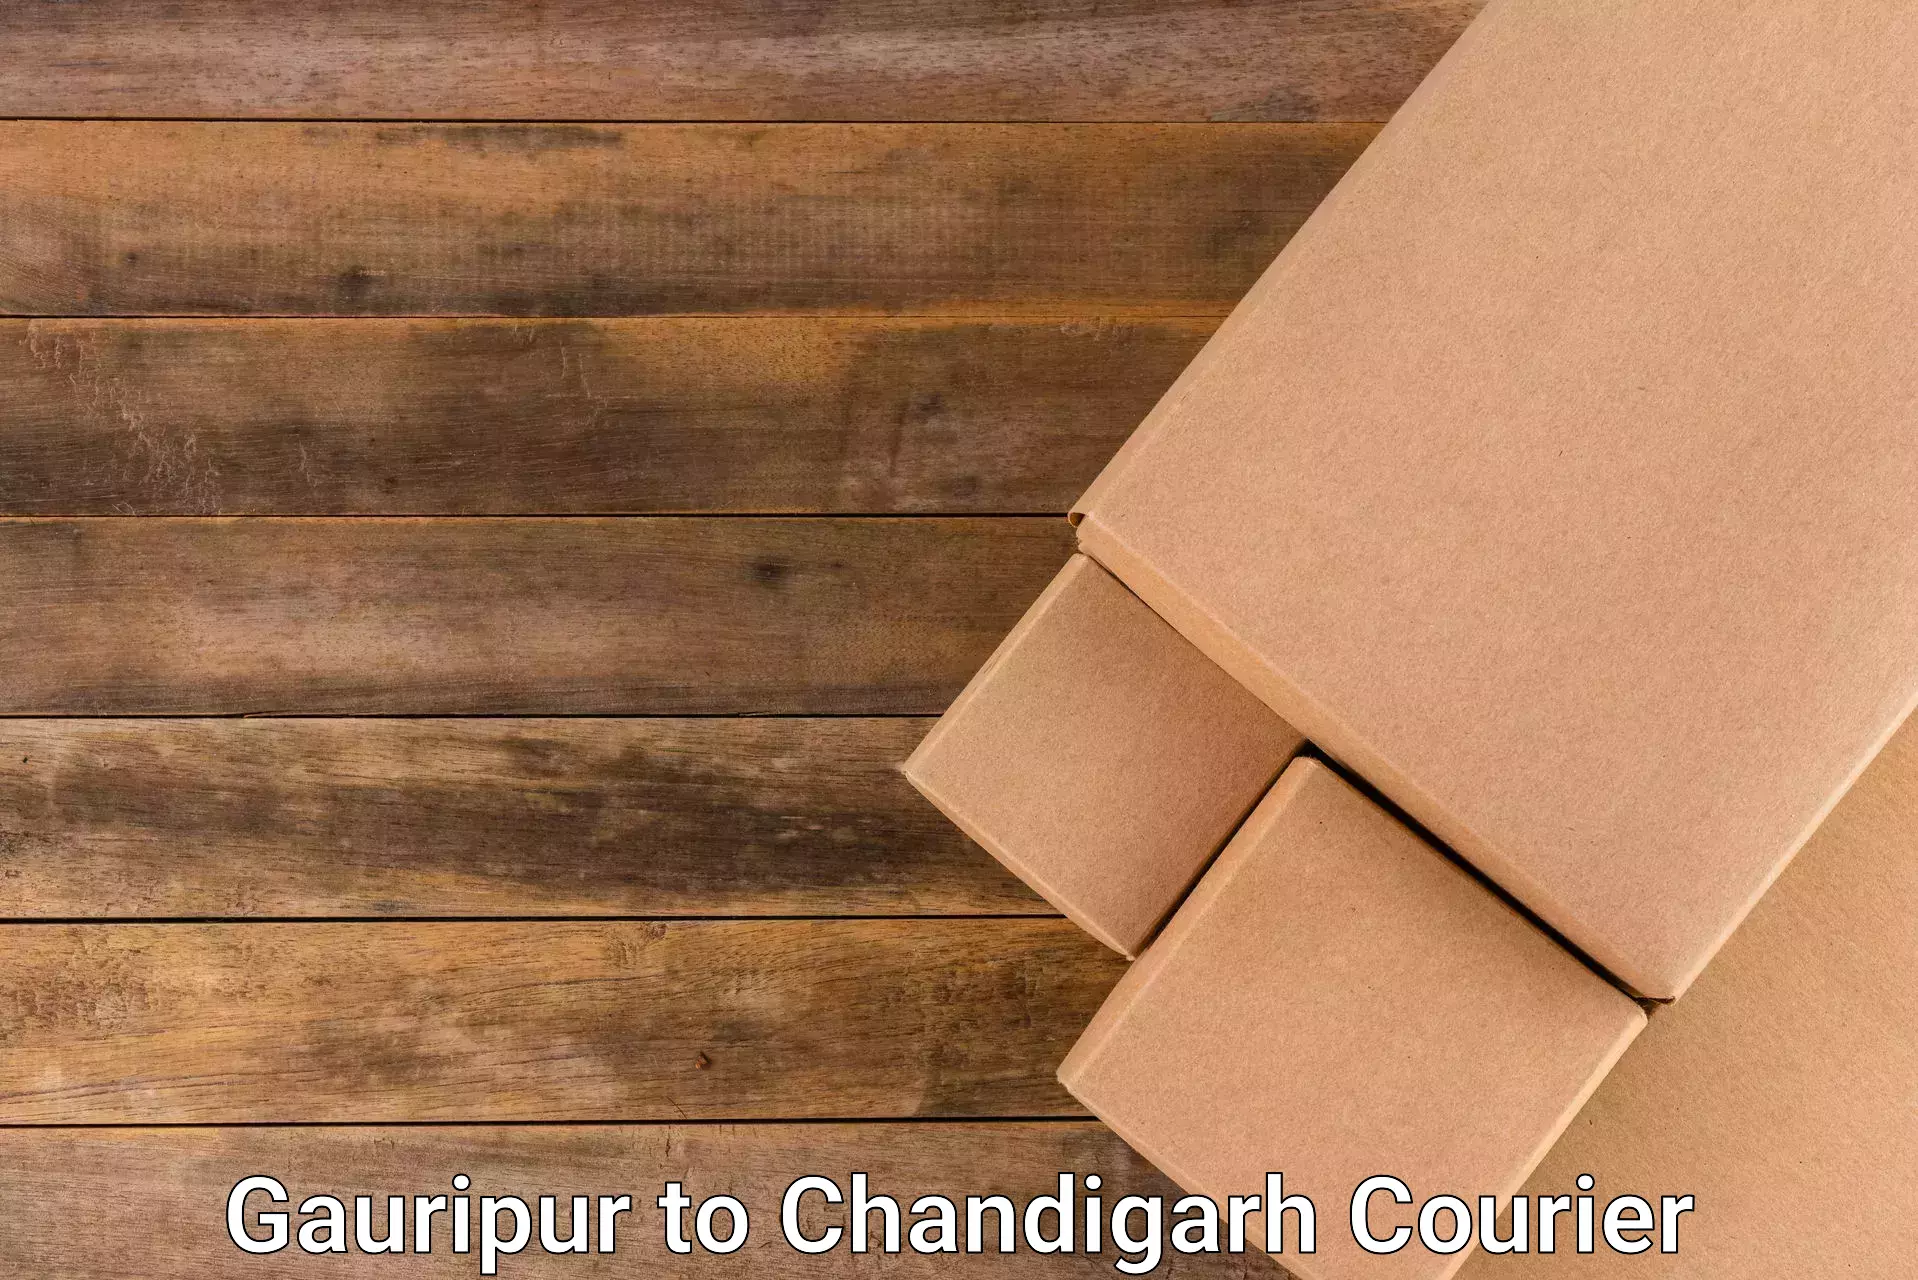 Professional courier handling Gauripur to Chandigarh